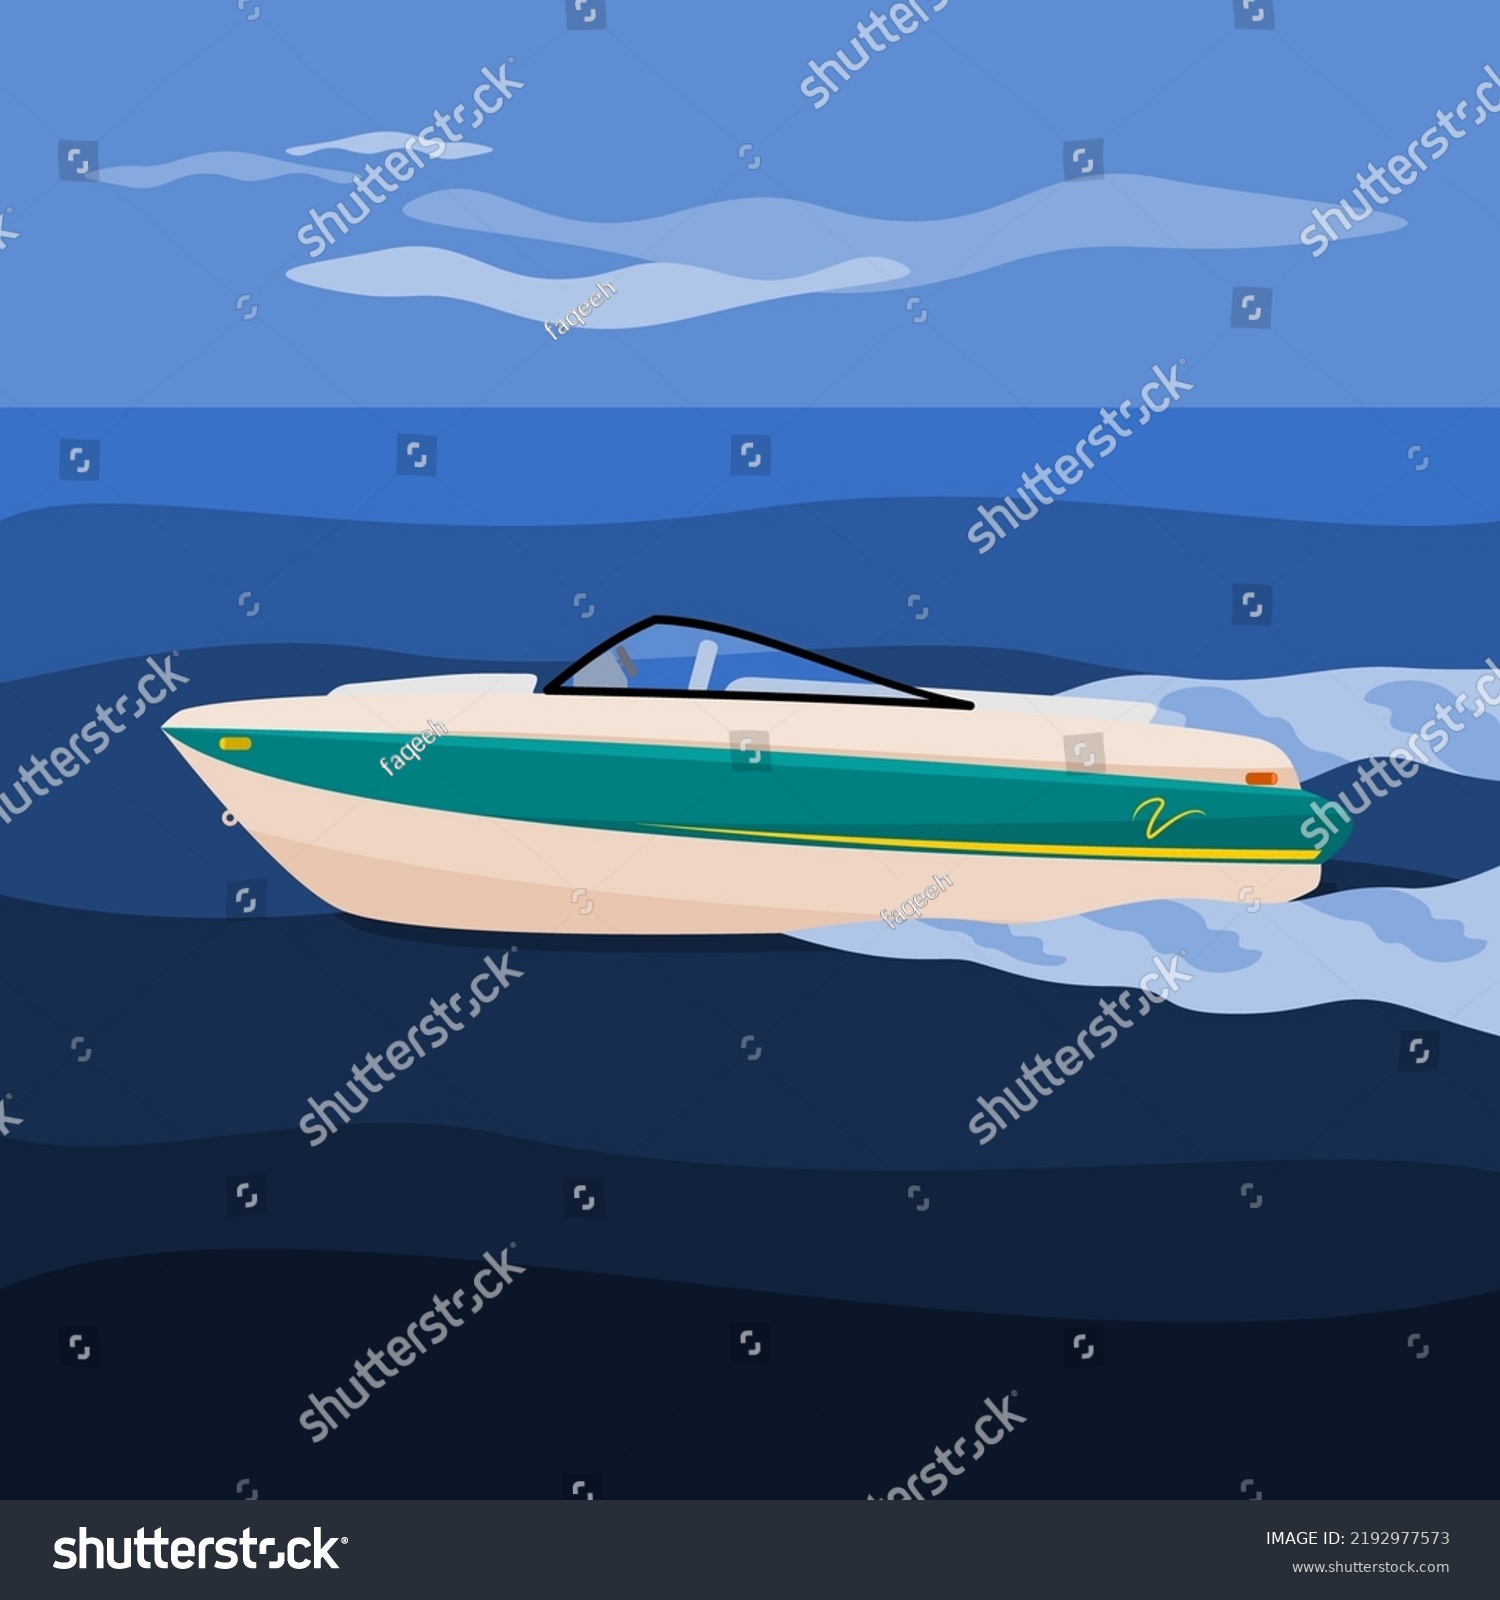 SVG of Editable Side View American Bowrider Boat on Water Vector Illustration for Artwork Element of Transportation or Recreation Related Design svg